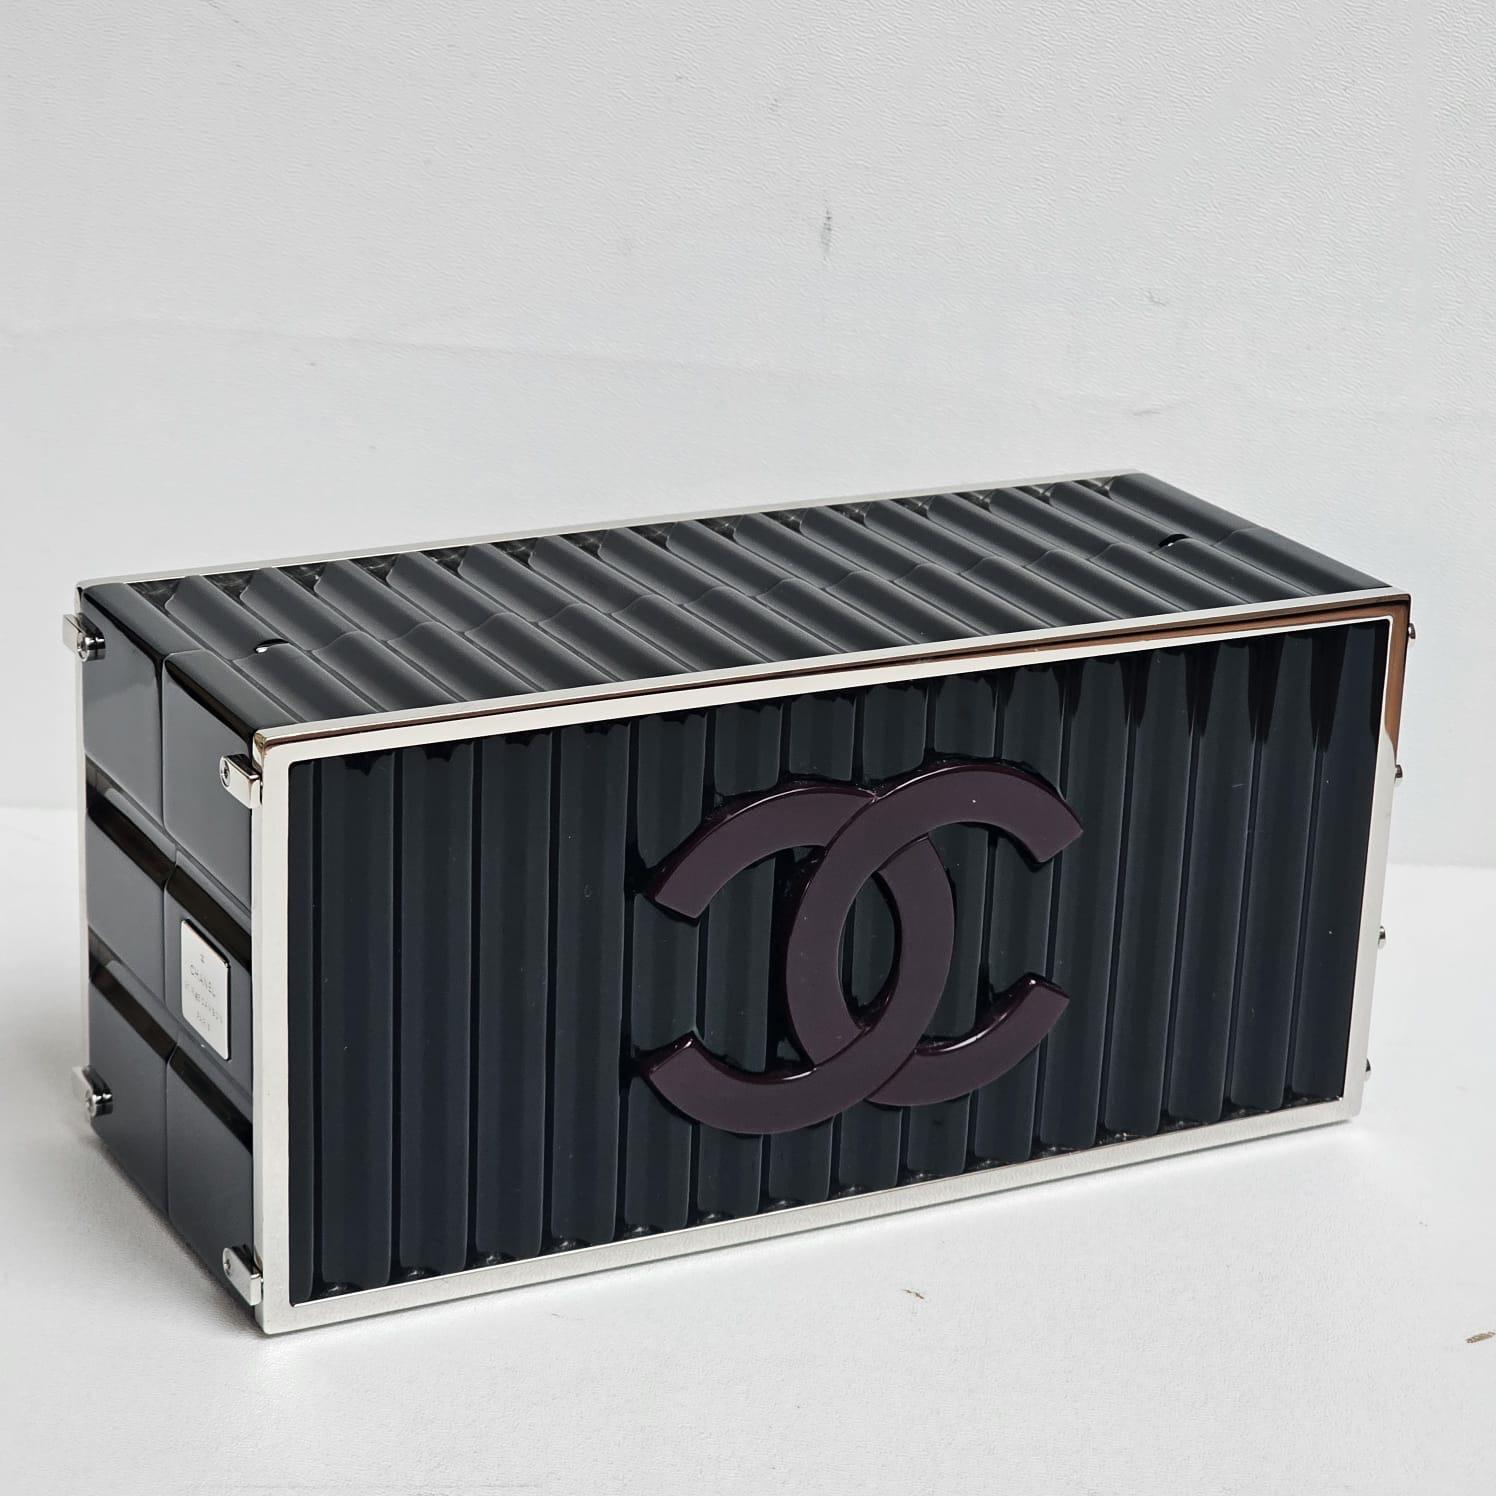 Rare Chanel Minaudiere Black Shipping Container Bag For Sale 5